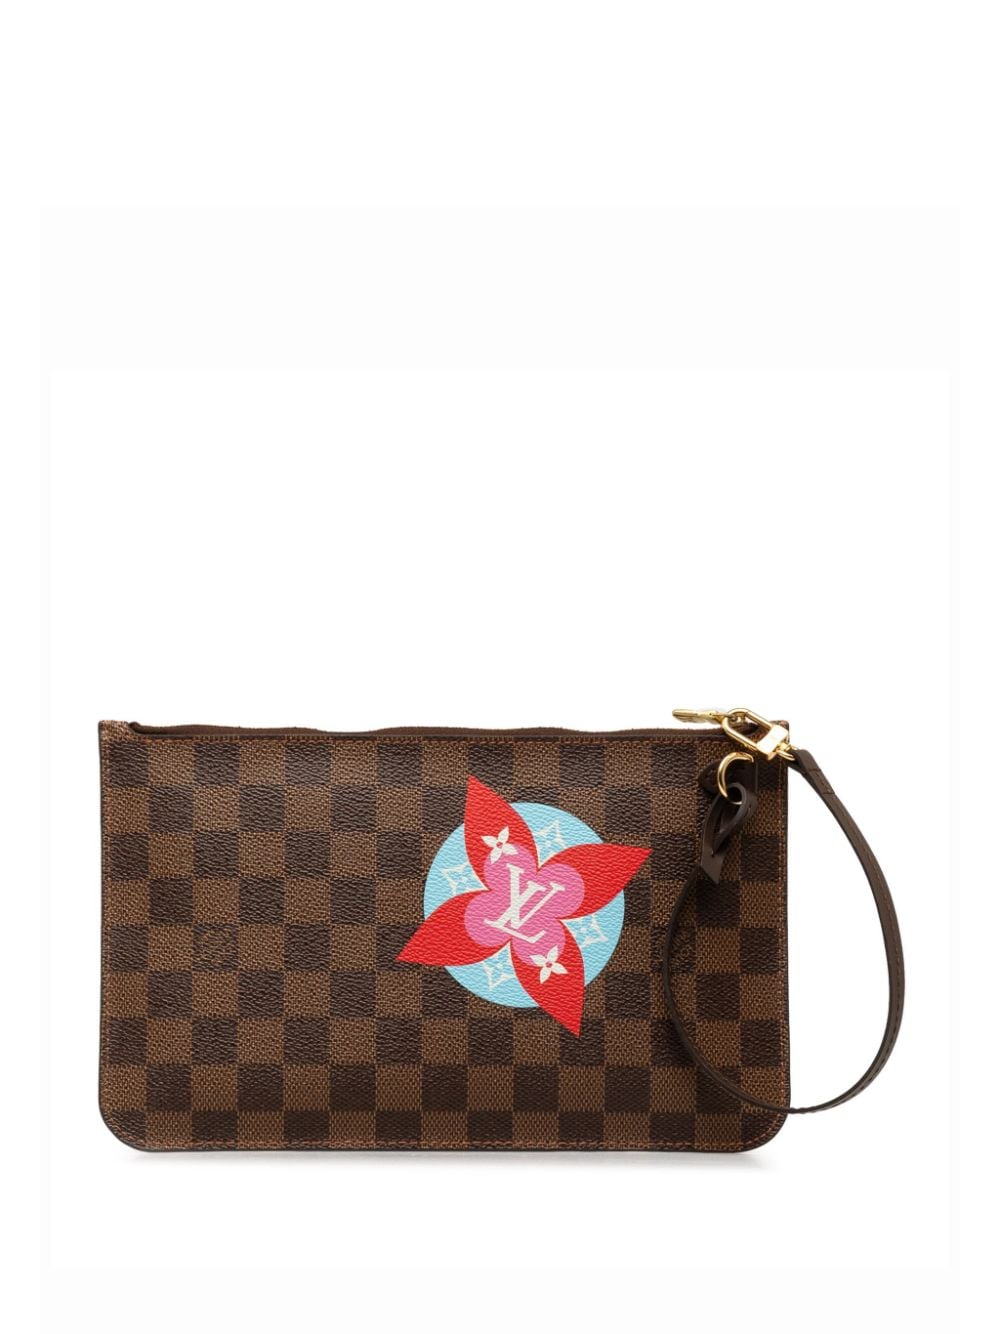 Louis Vuitton Pre-Owned 2018 Damier Ebene Patches Neverfull pouch - Bruin